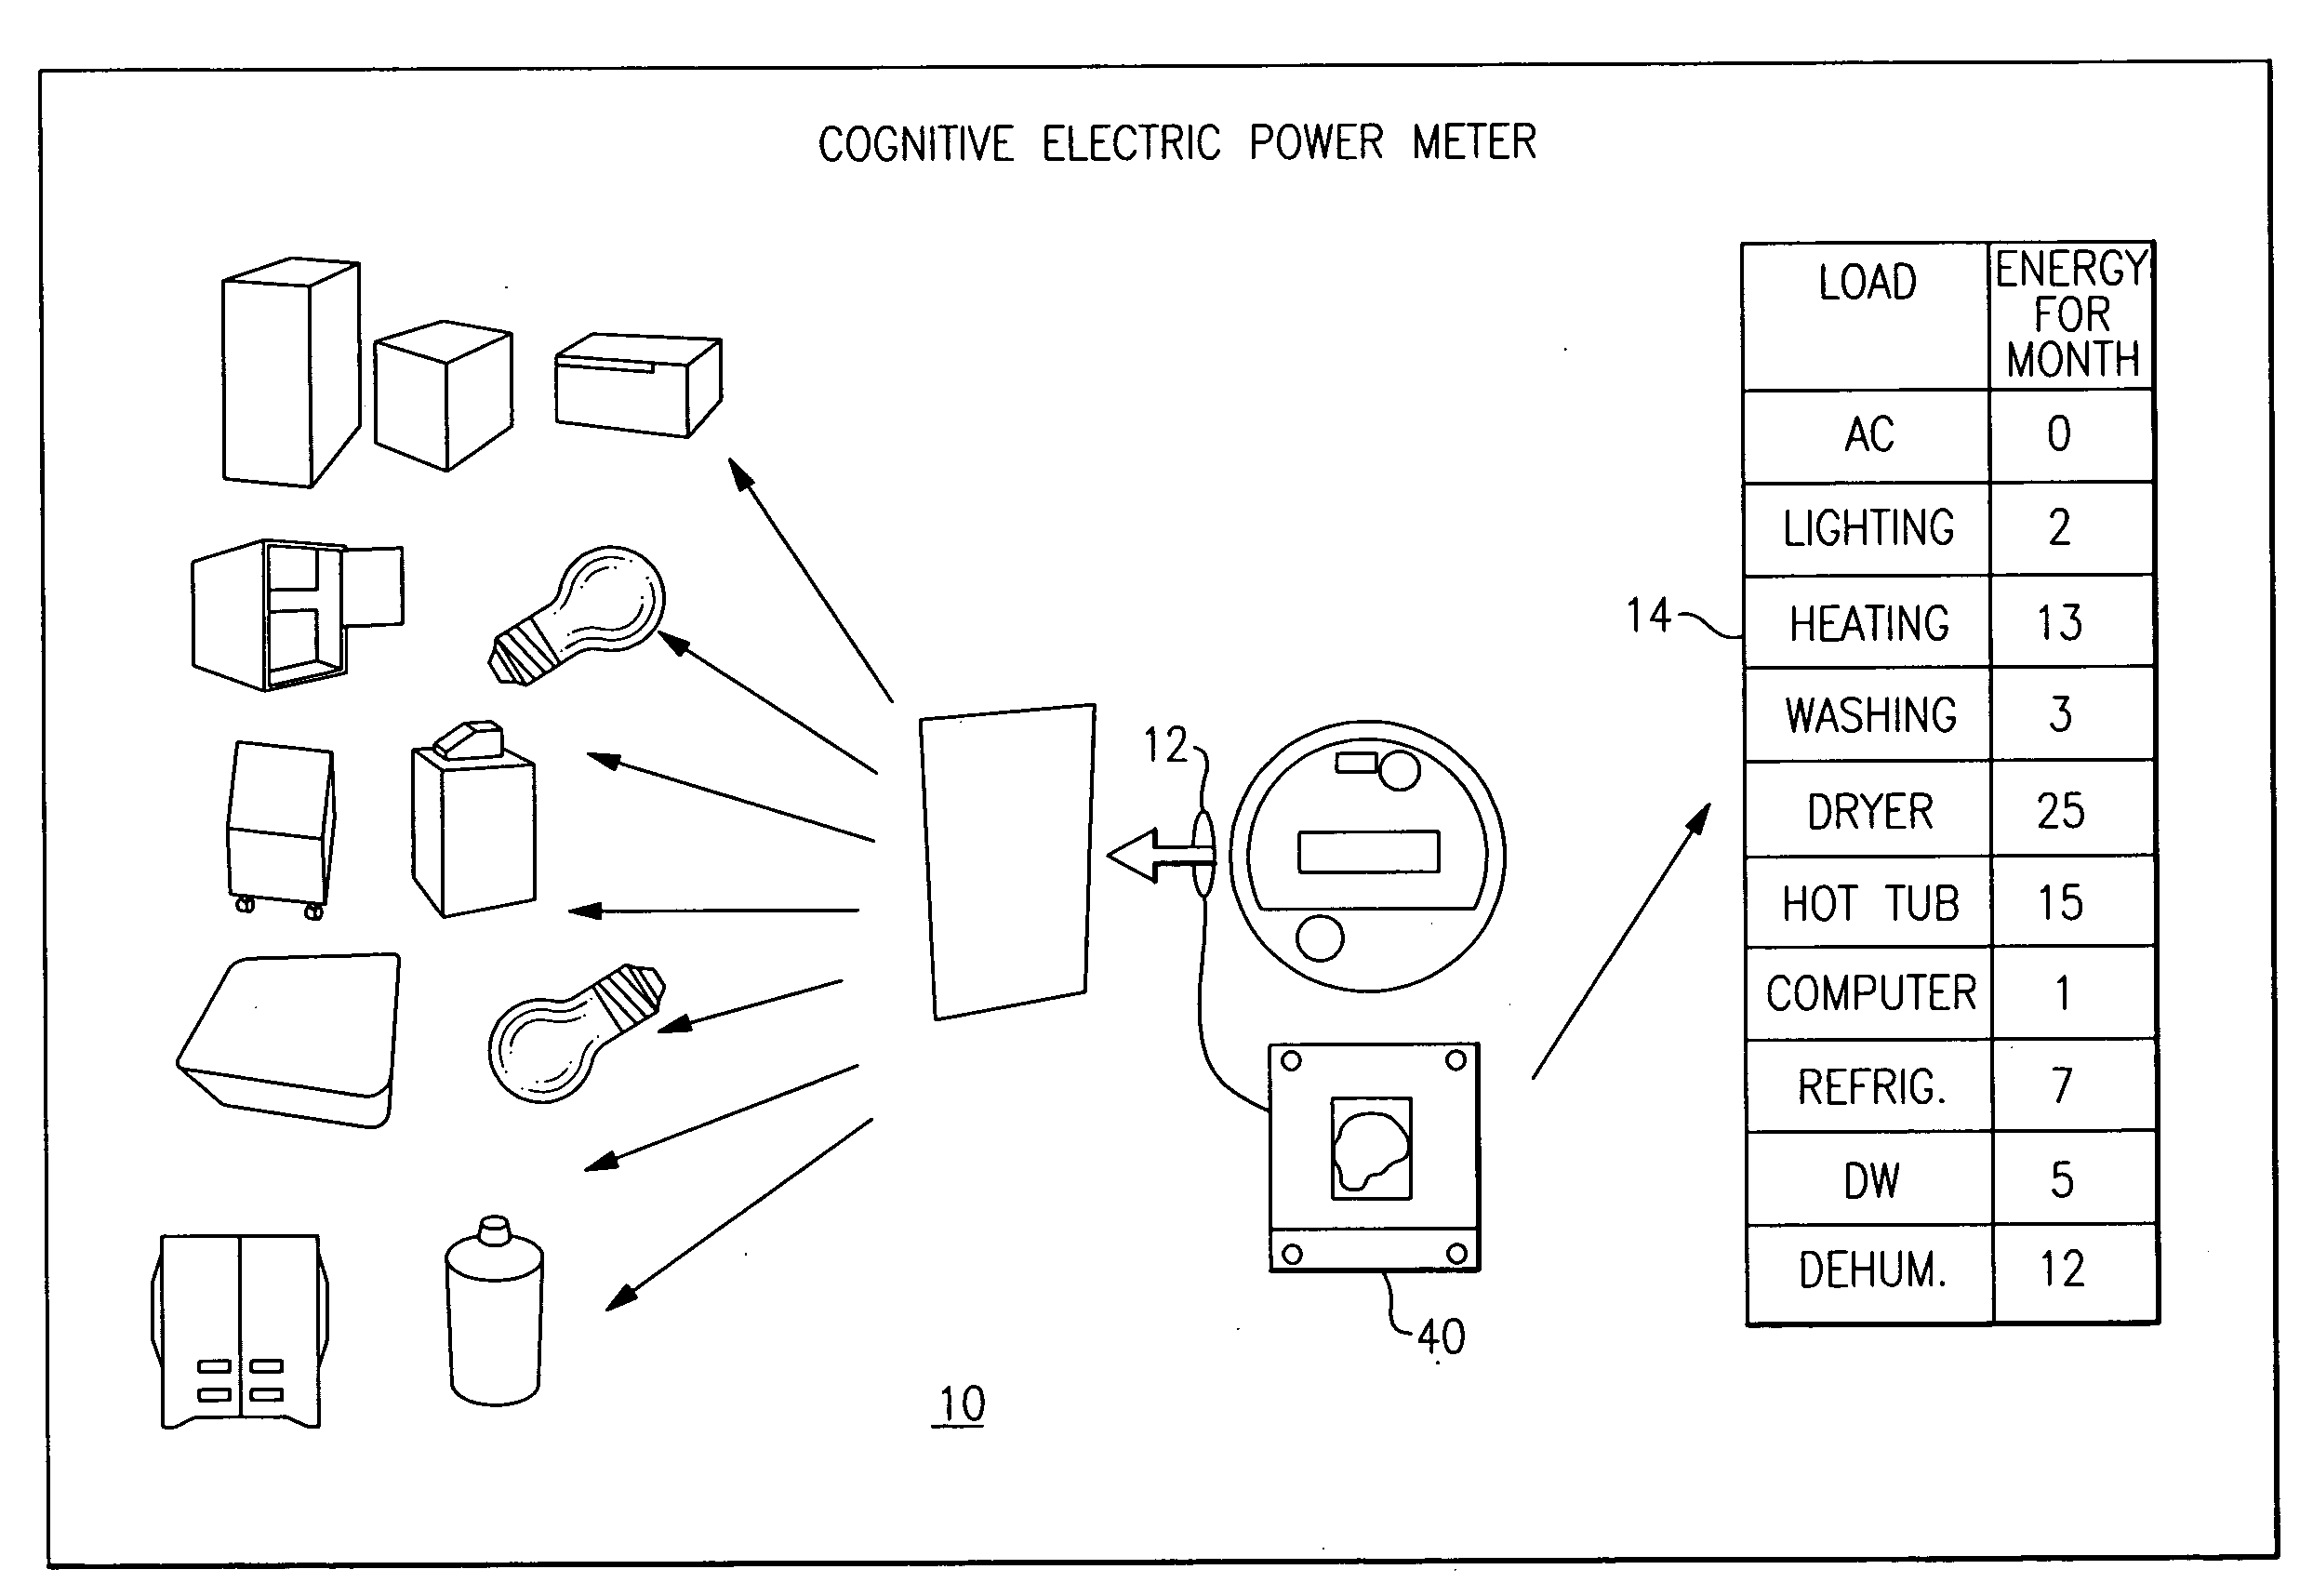 Cognitive electric power meter